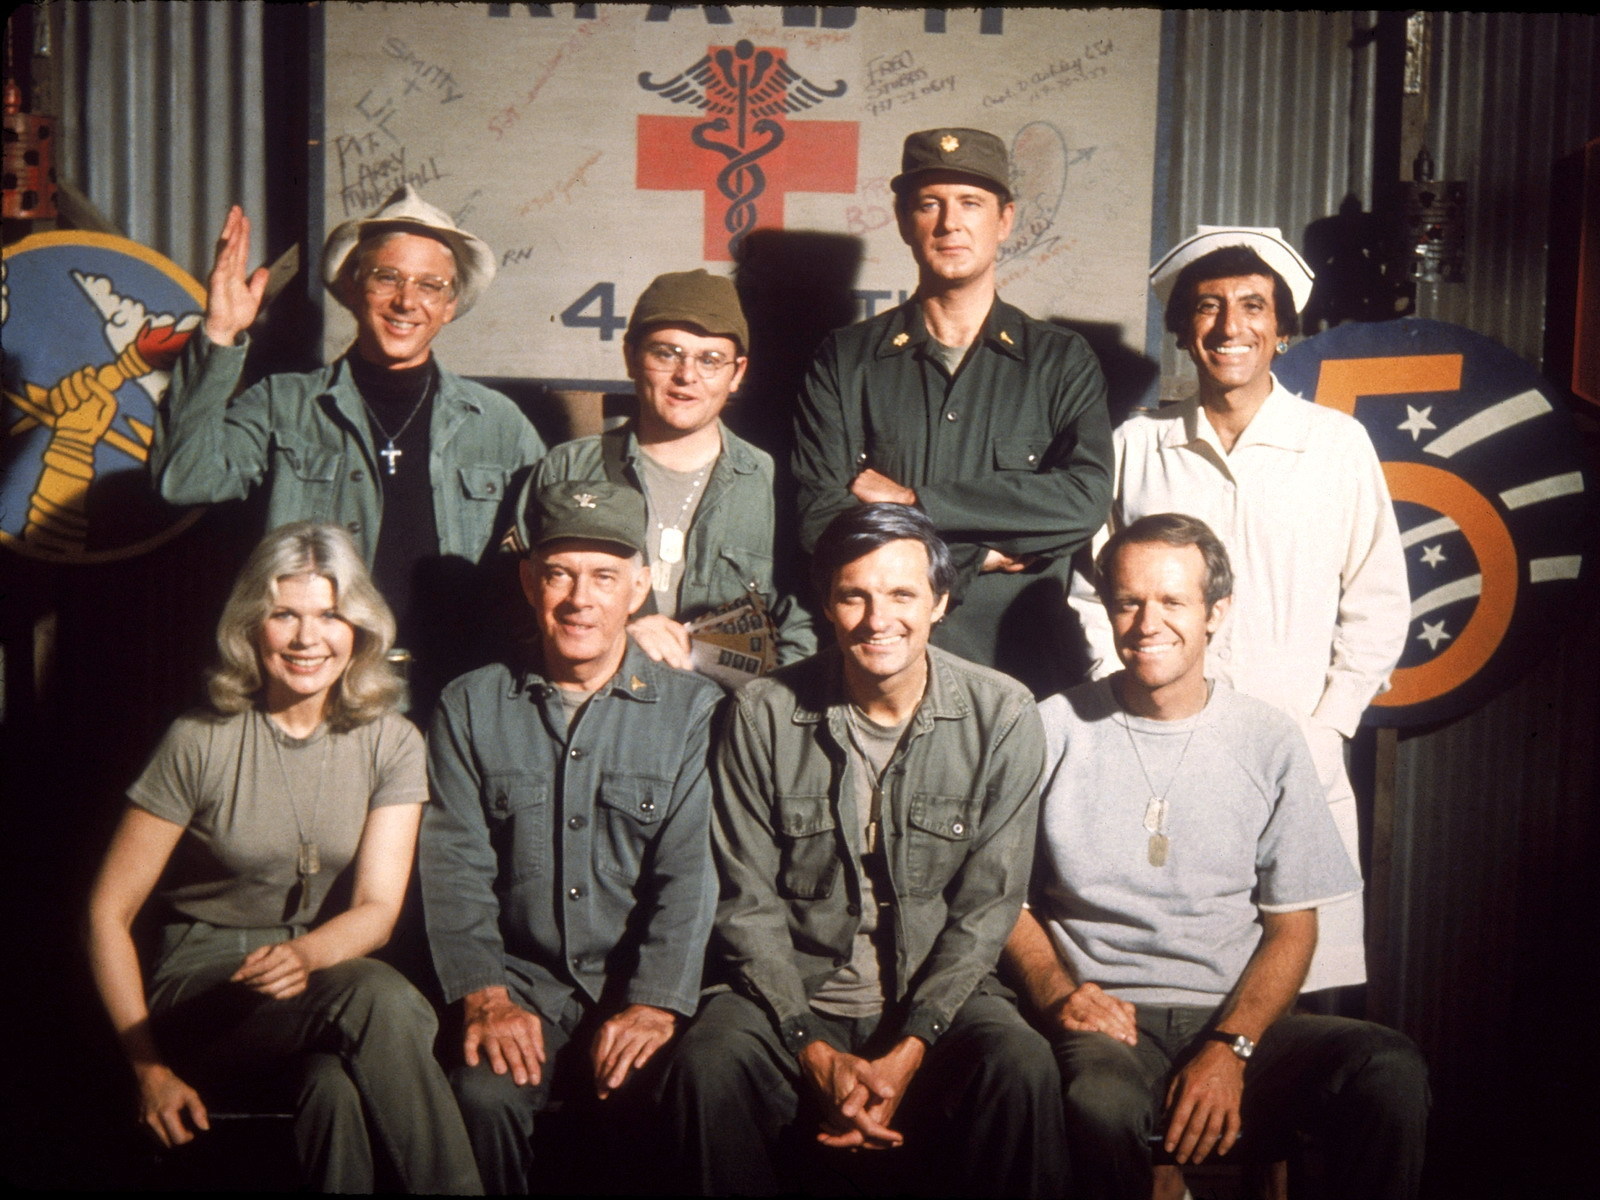 M A S H Metv To Air Finale For Veteran Day Canceled Renewed